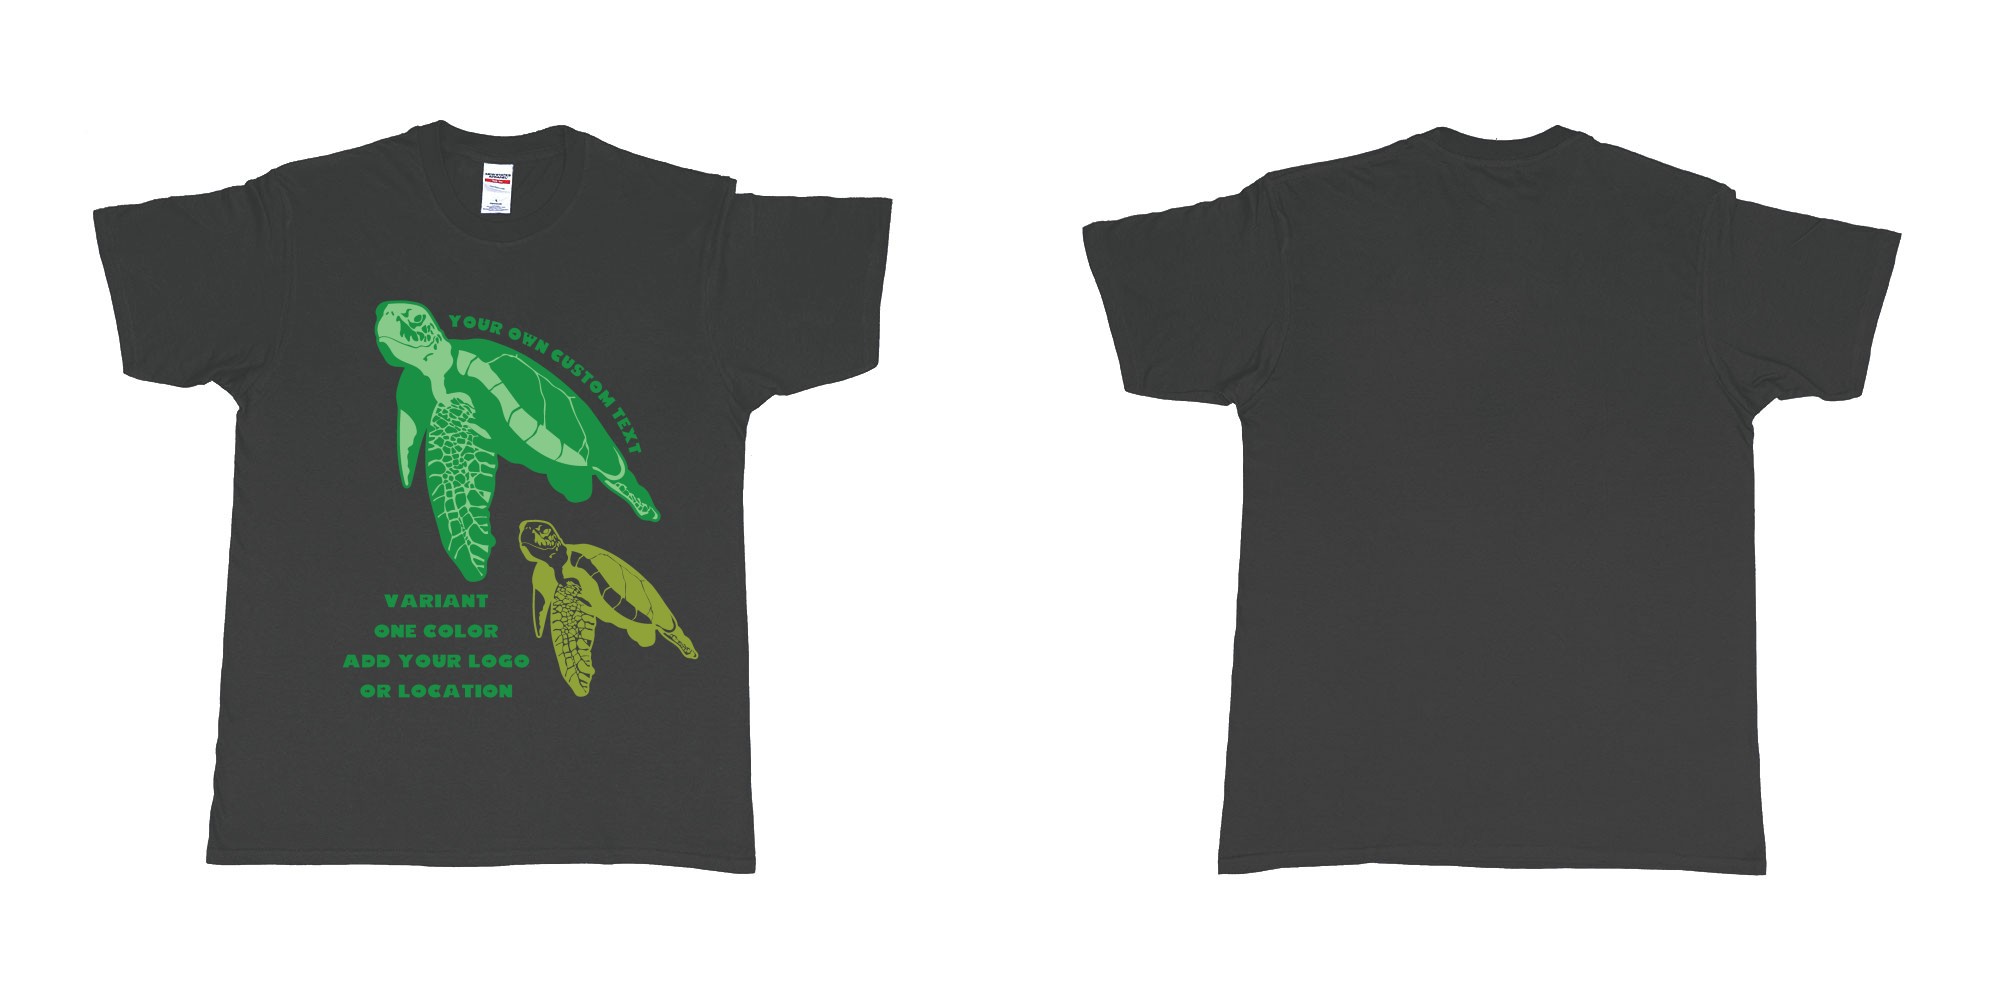 Custom tshirt design hawksbill green sea turtle chilling add logo in fabric color black choice your own text made in Bali by The Pirate Way